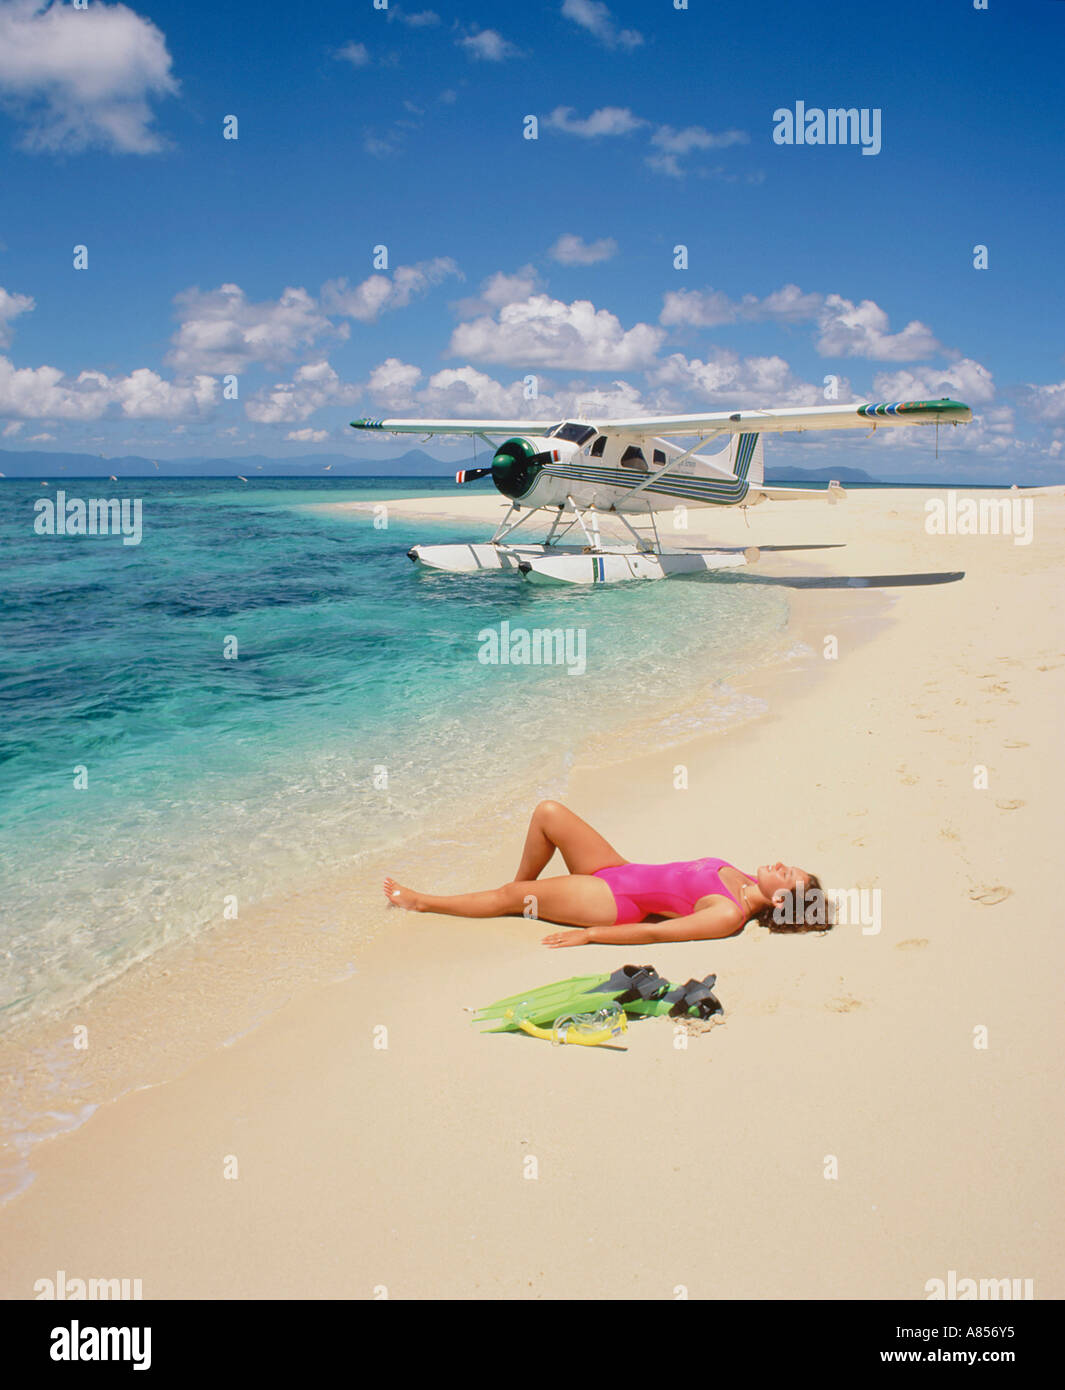 Young woman in swimsuit reclining on her back on the beach at Sudbury Cay, Queensland, Australia. Sea plane in background. Stock Photo